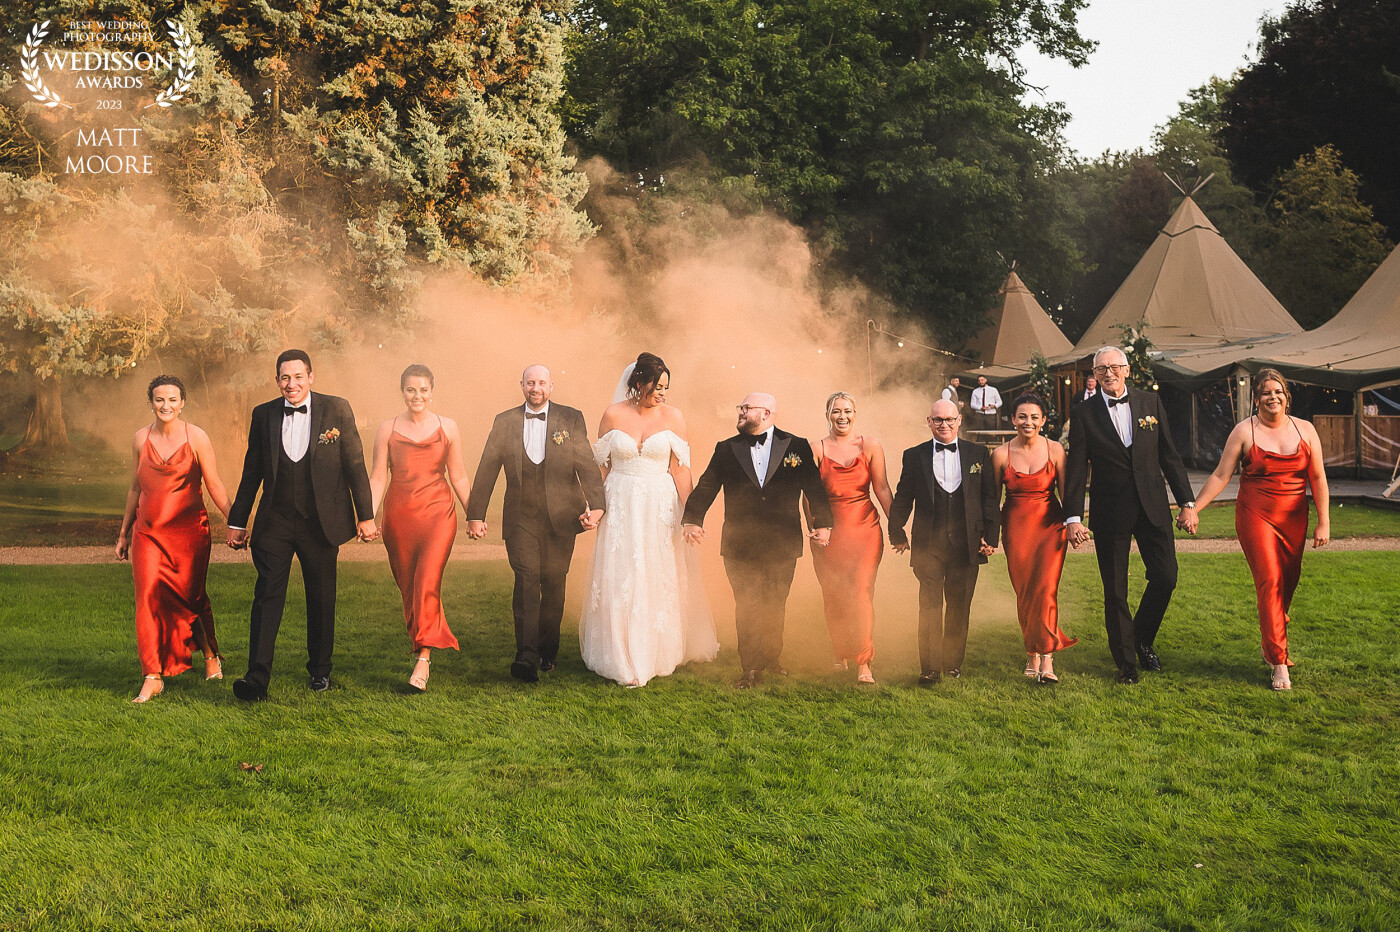 Smoke bombs a pletny at this lovely wedding in the woods for Blaine and Laura. Magical!